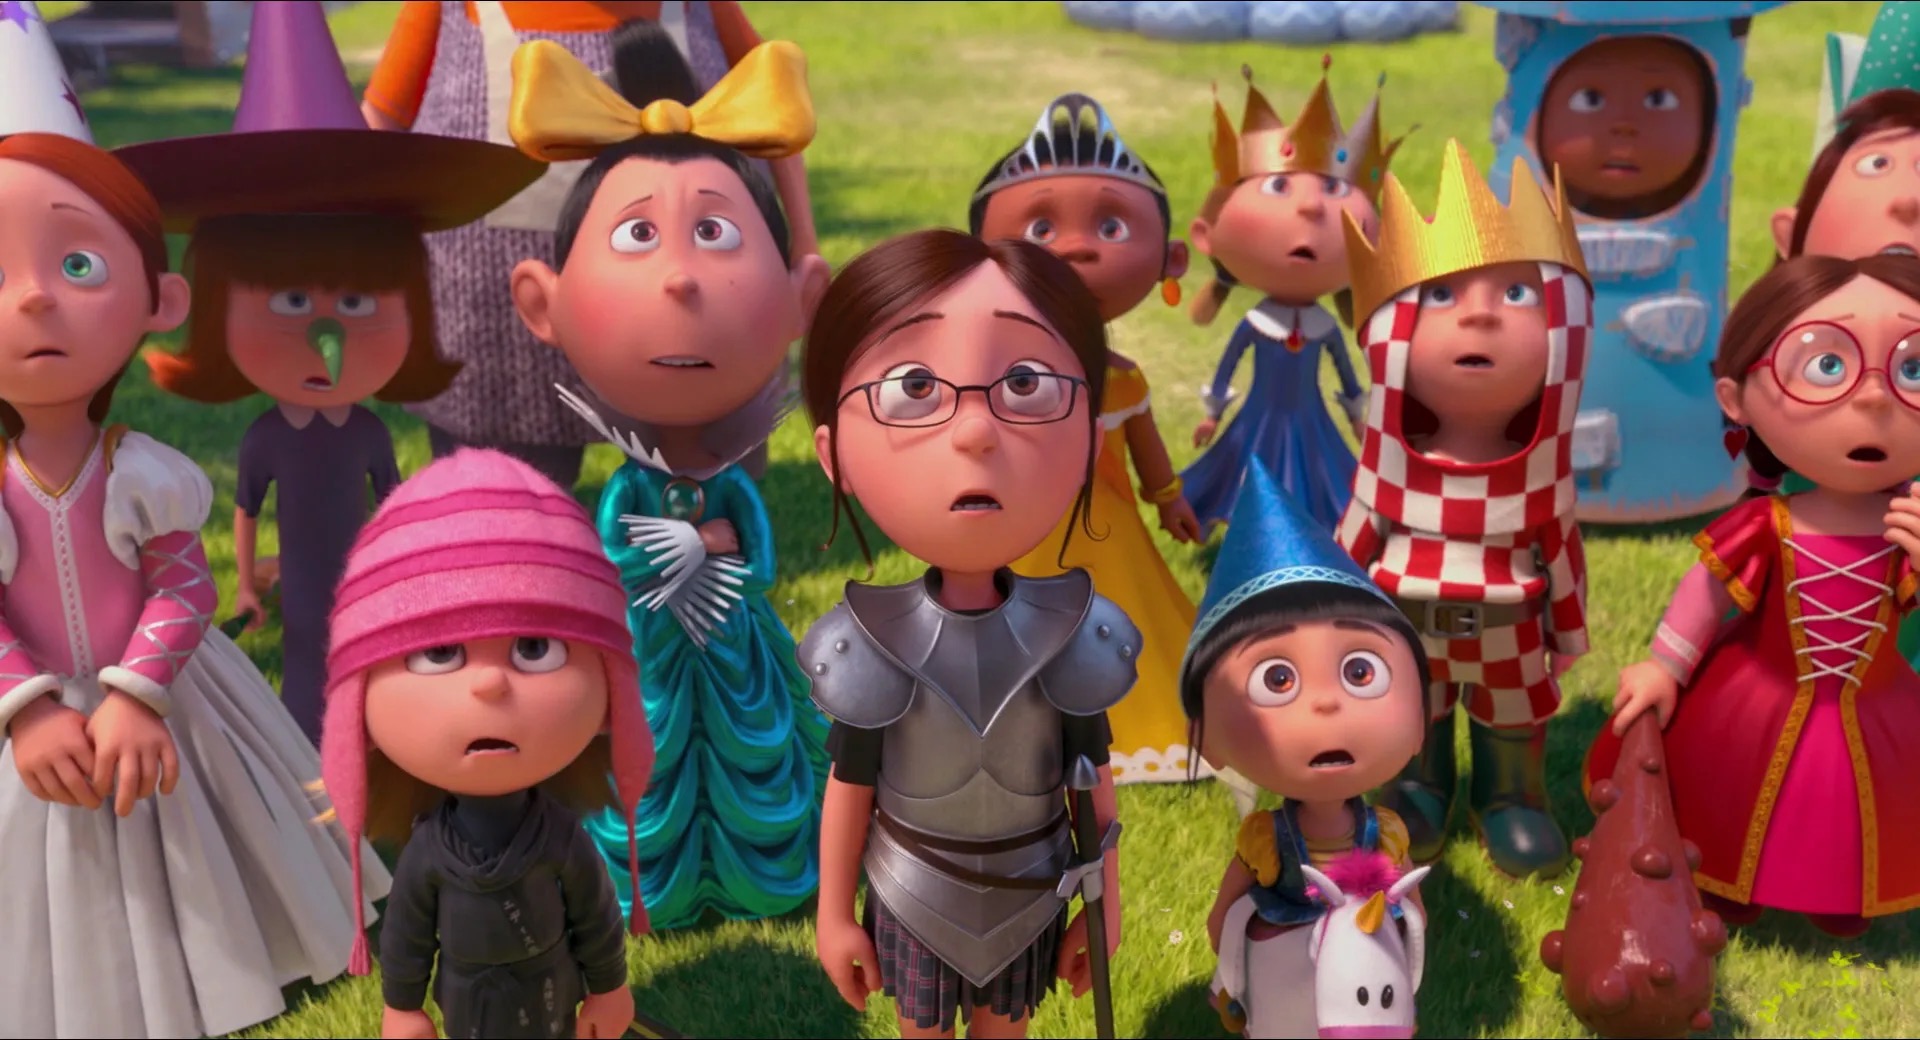 “Despicable Me” Movies and Their Lack of Diversity; Is It really THAT Hard to Illustrate a Brown Kid?